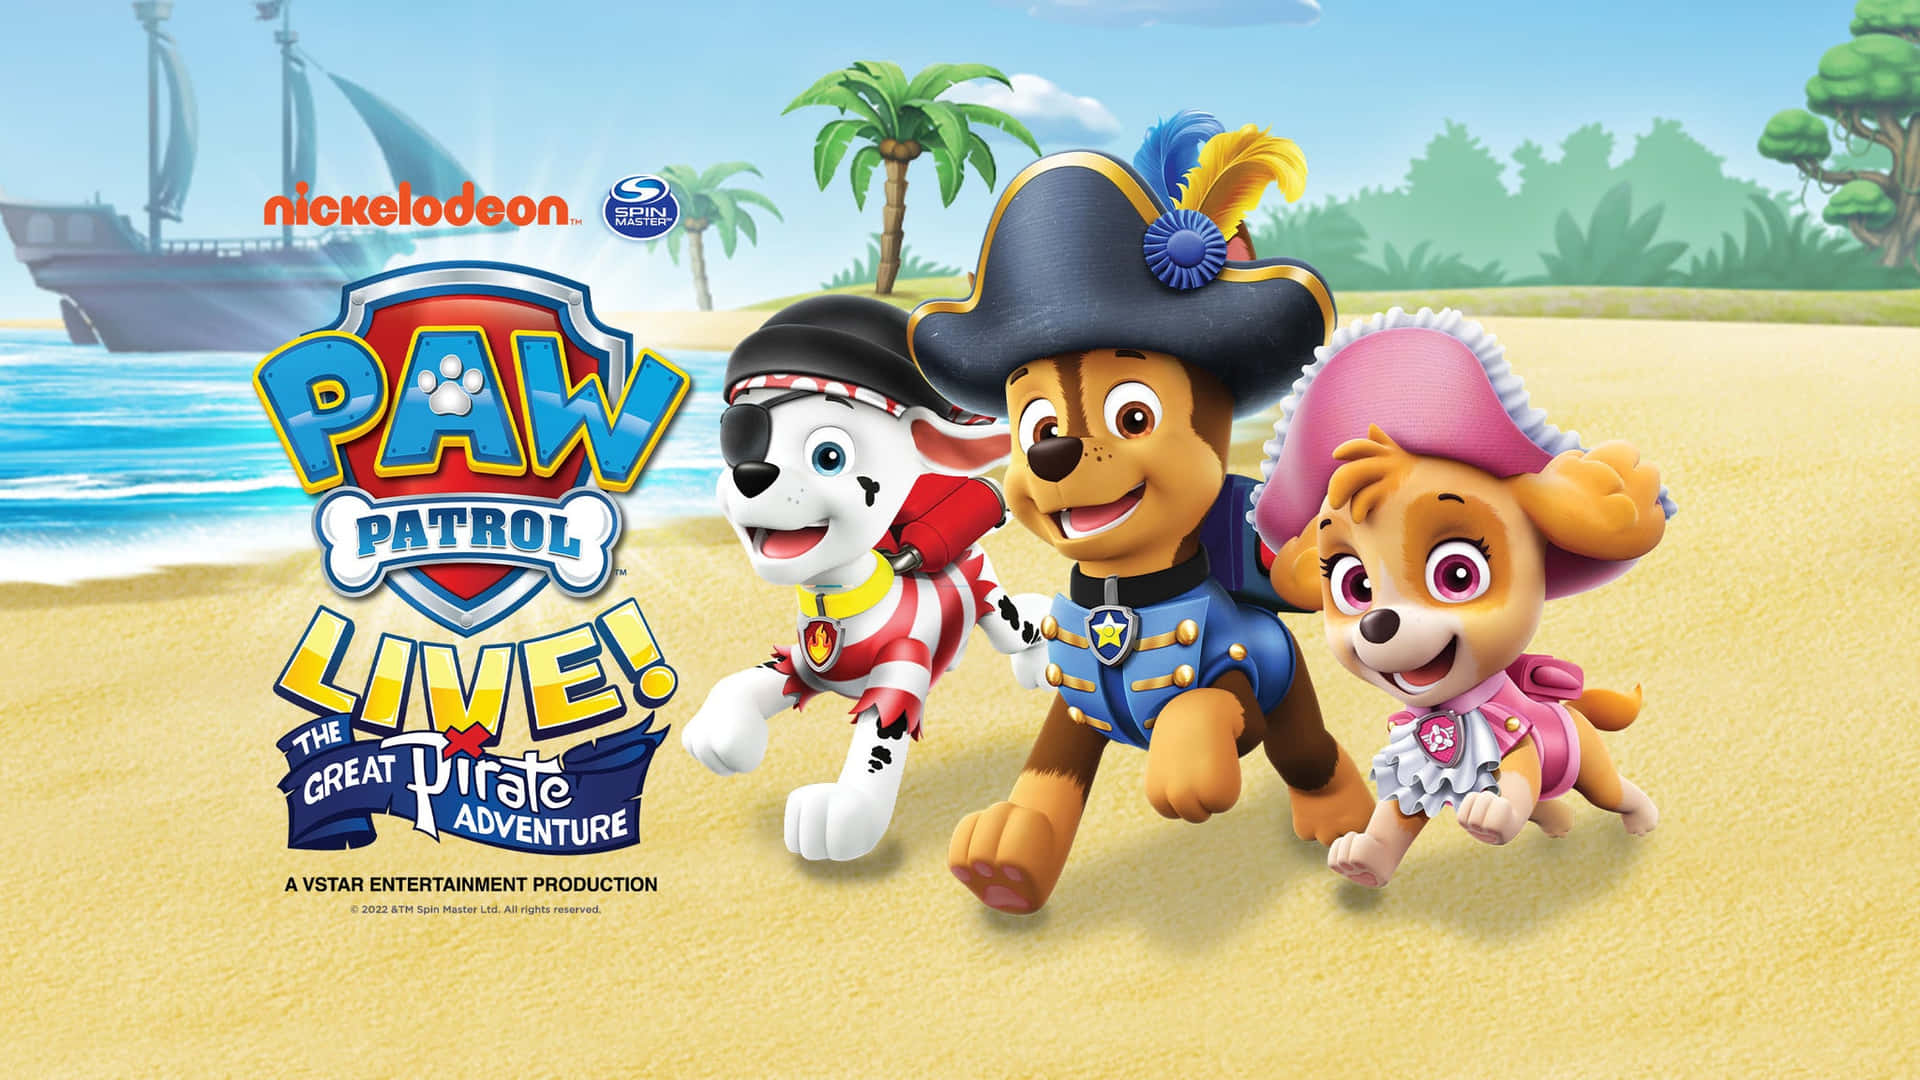 "Join Chase, Marshall and their friends in the amazing world of Paw Patrol!"